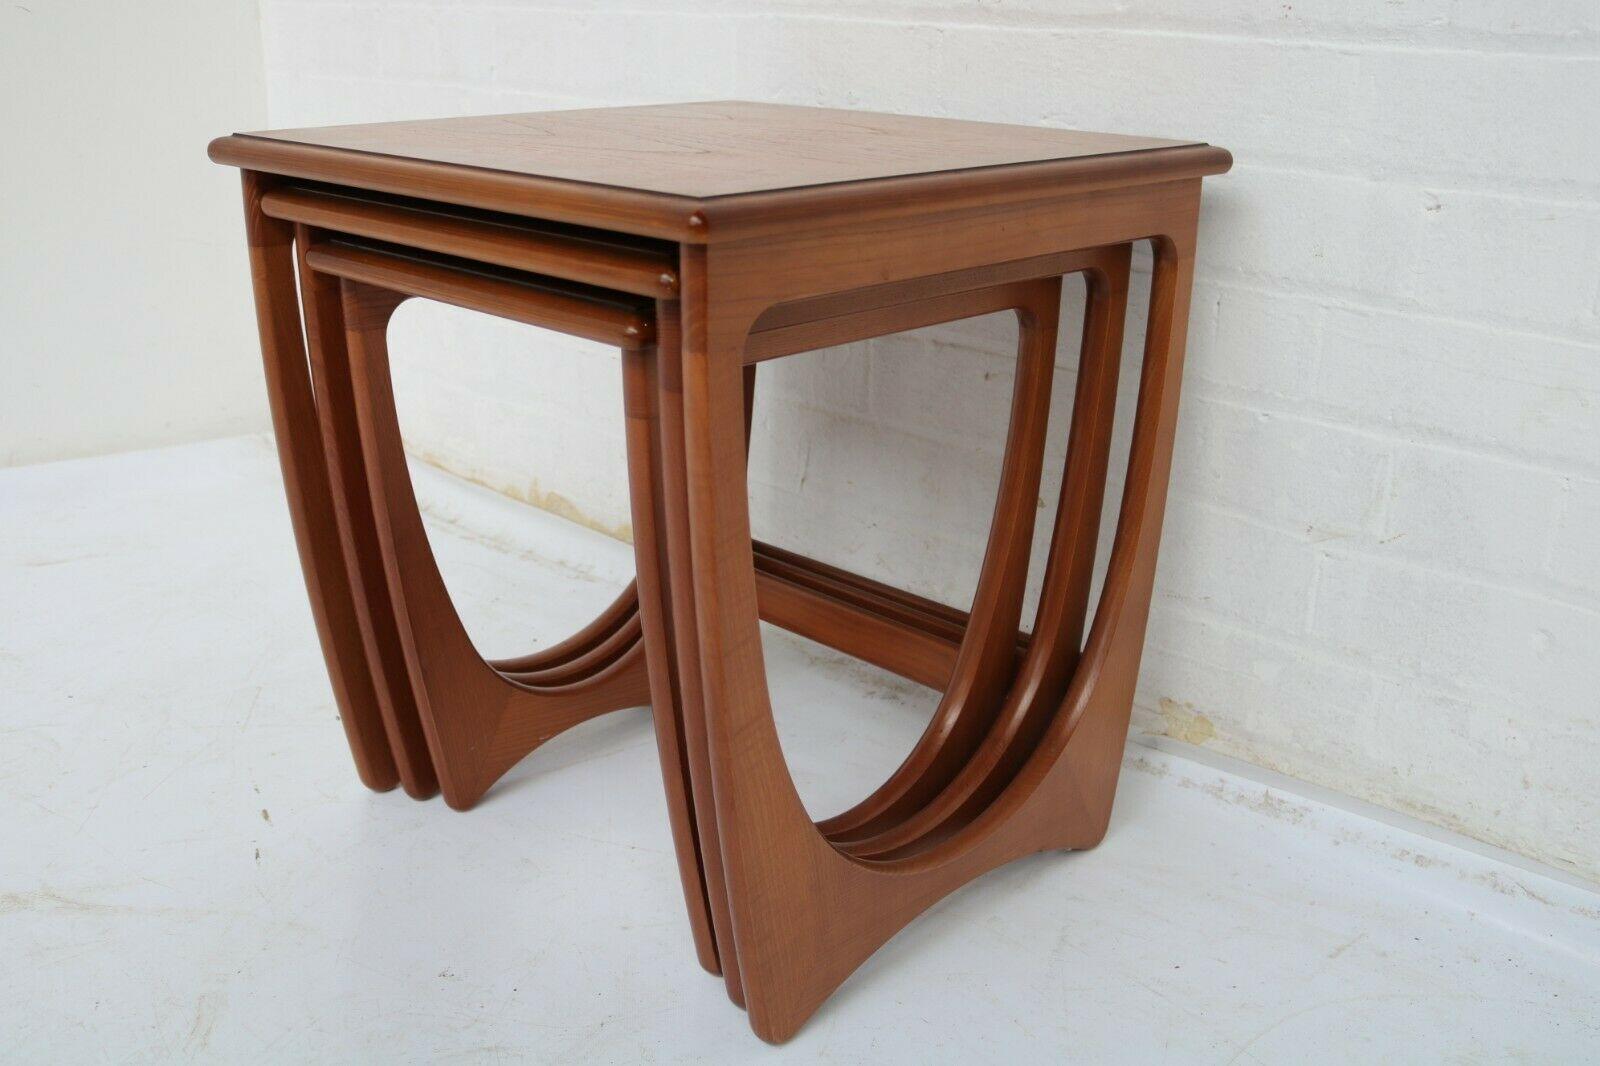 Polished Mid-Century Set of 3 Teak Nesting Tables Mod. Astro by Victor Wilkins for G Plan